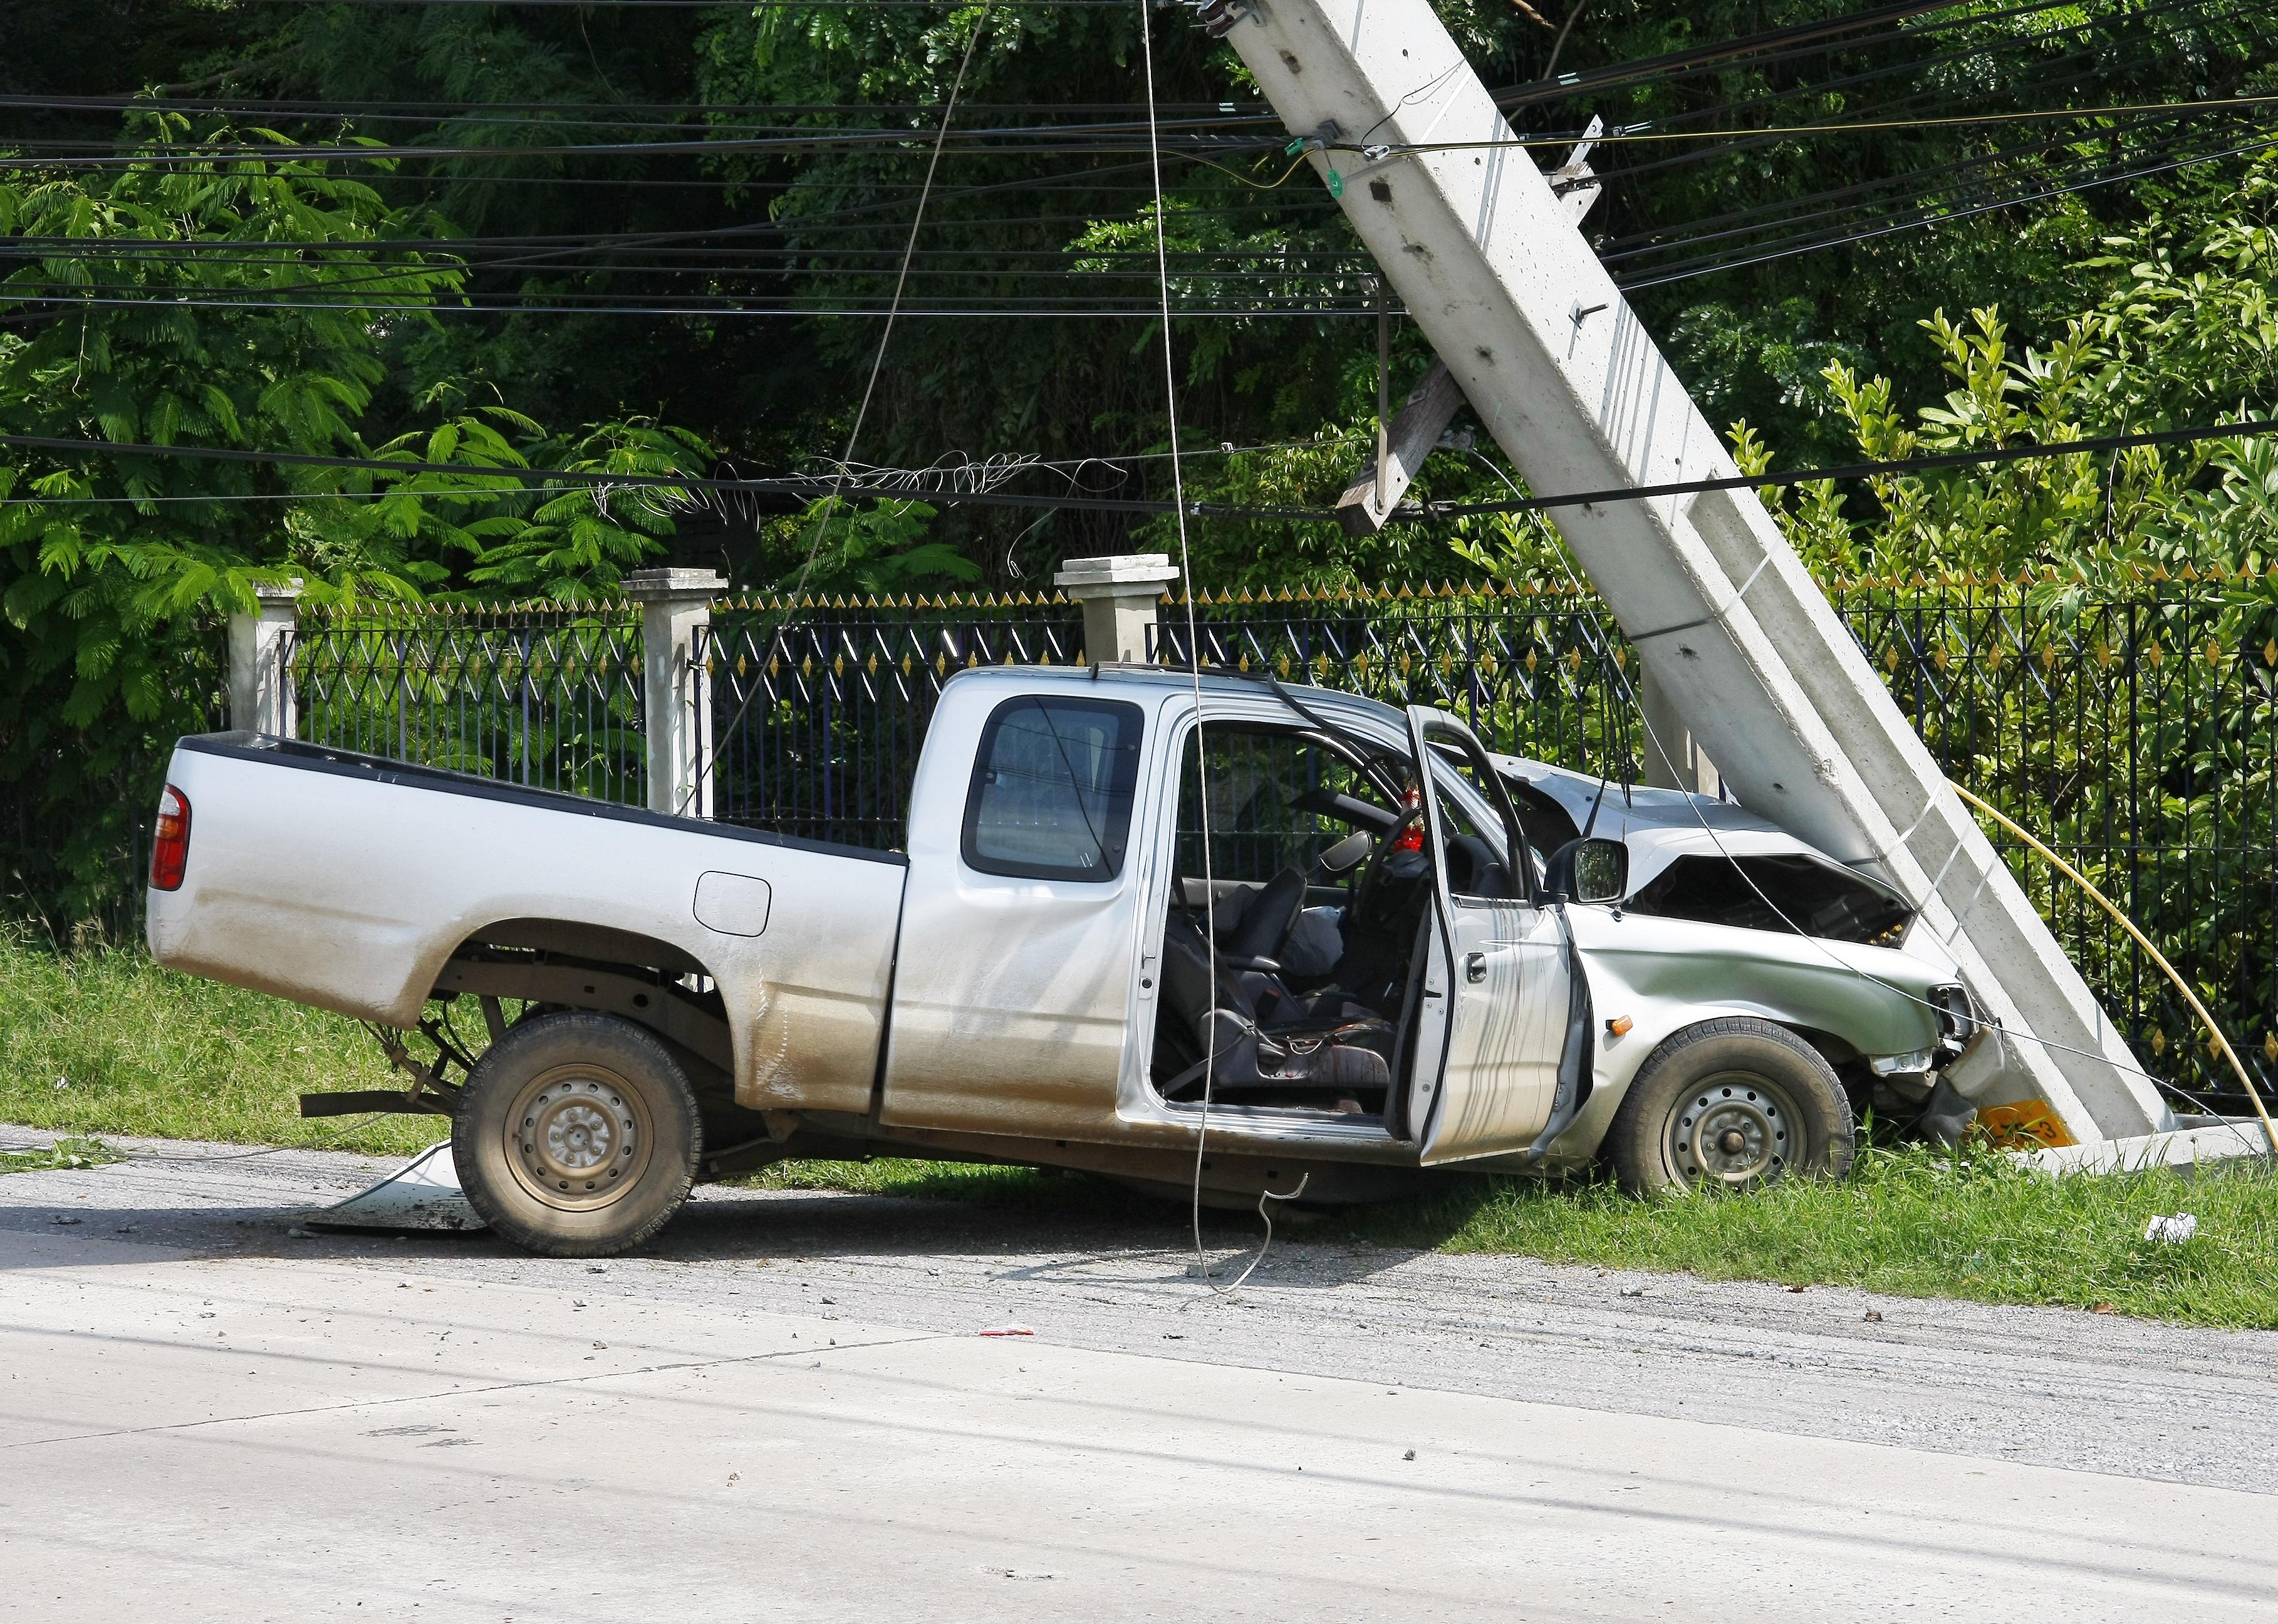 A truck after crashing into a pole.